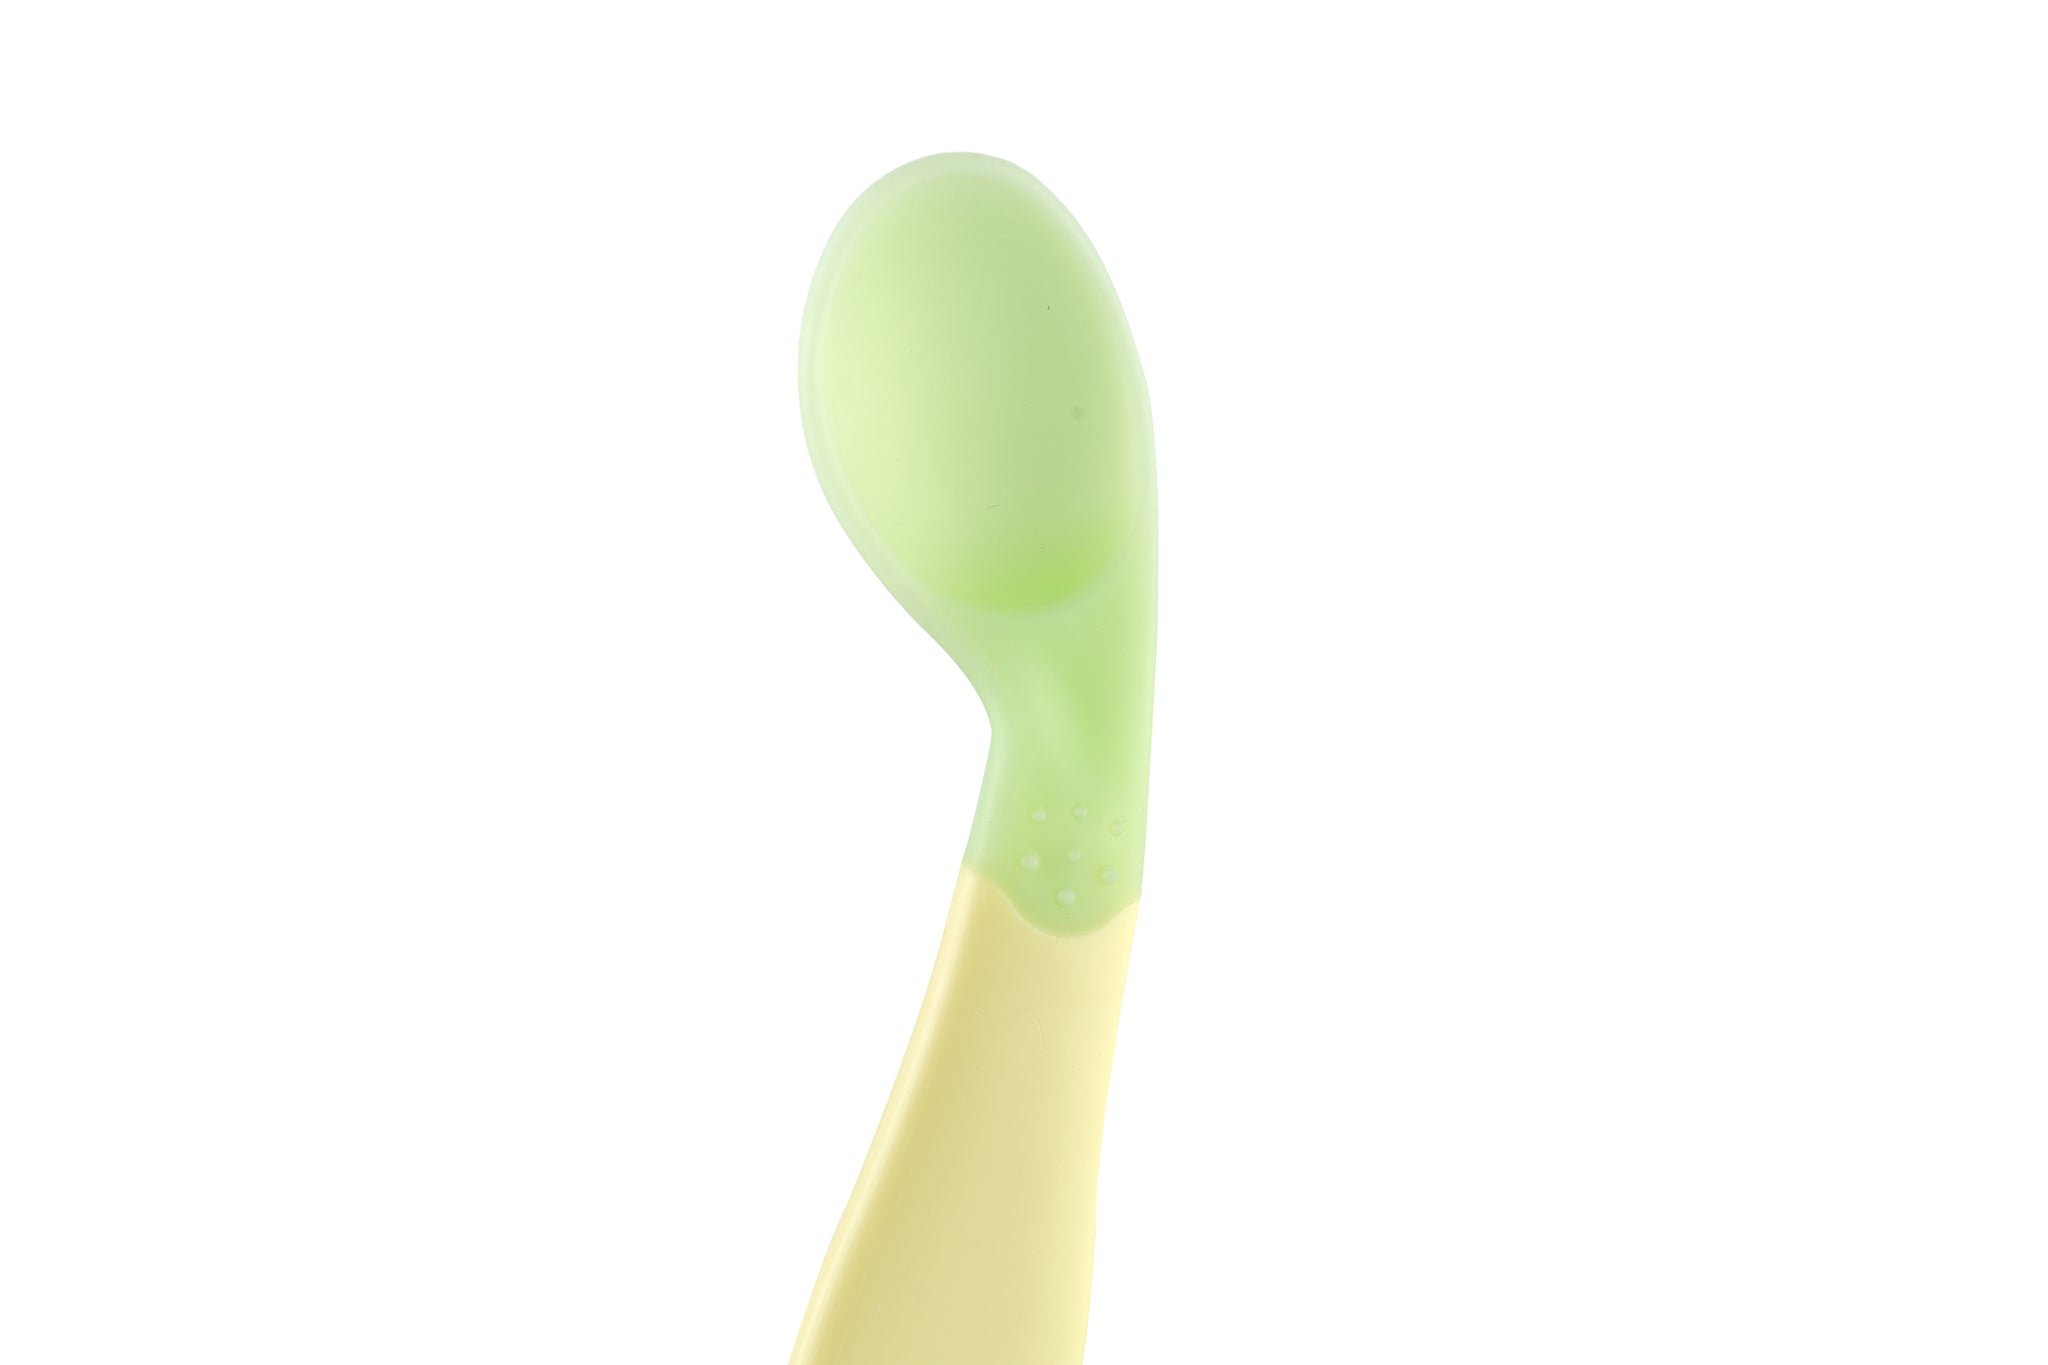 Soft tip Silicone Spoons(Green and Blue) – Chic Buddy